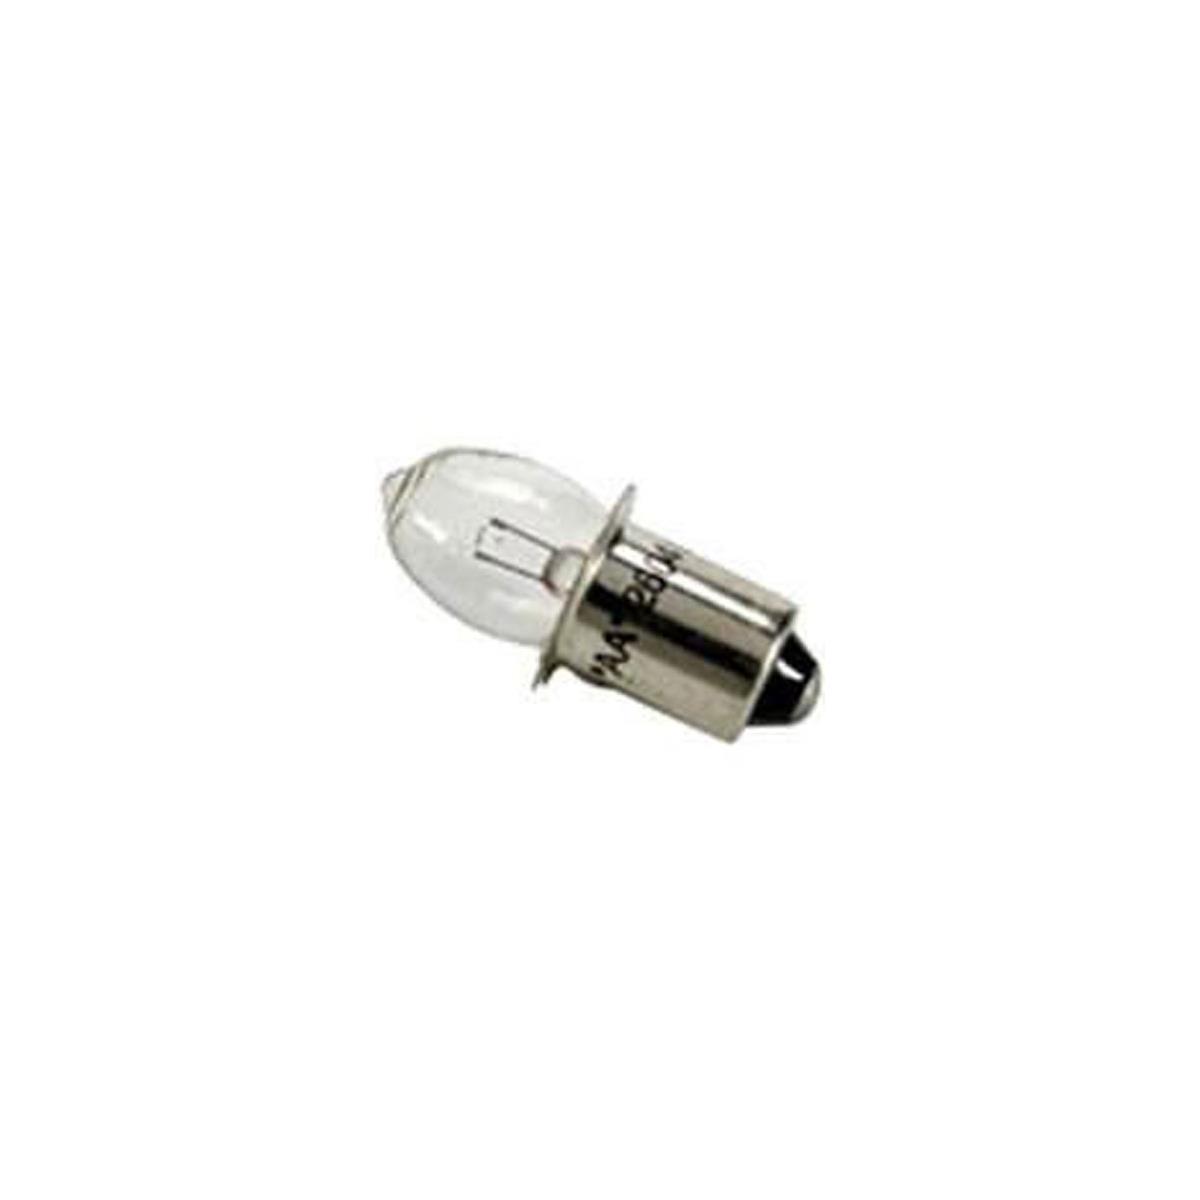 Image of Pelican 2604LM 3W 6V Xenon Low-Intensity Lamp for HeadsUp Lite 2600 Flashlight